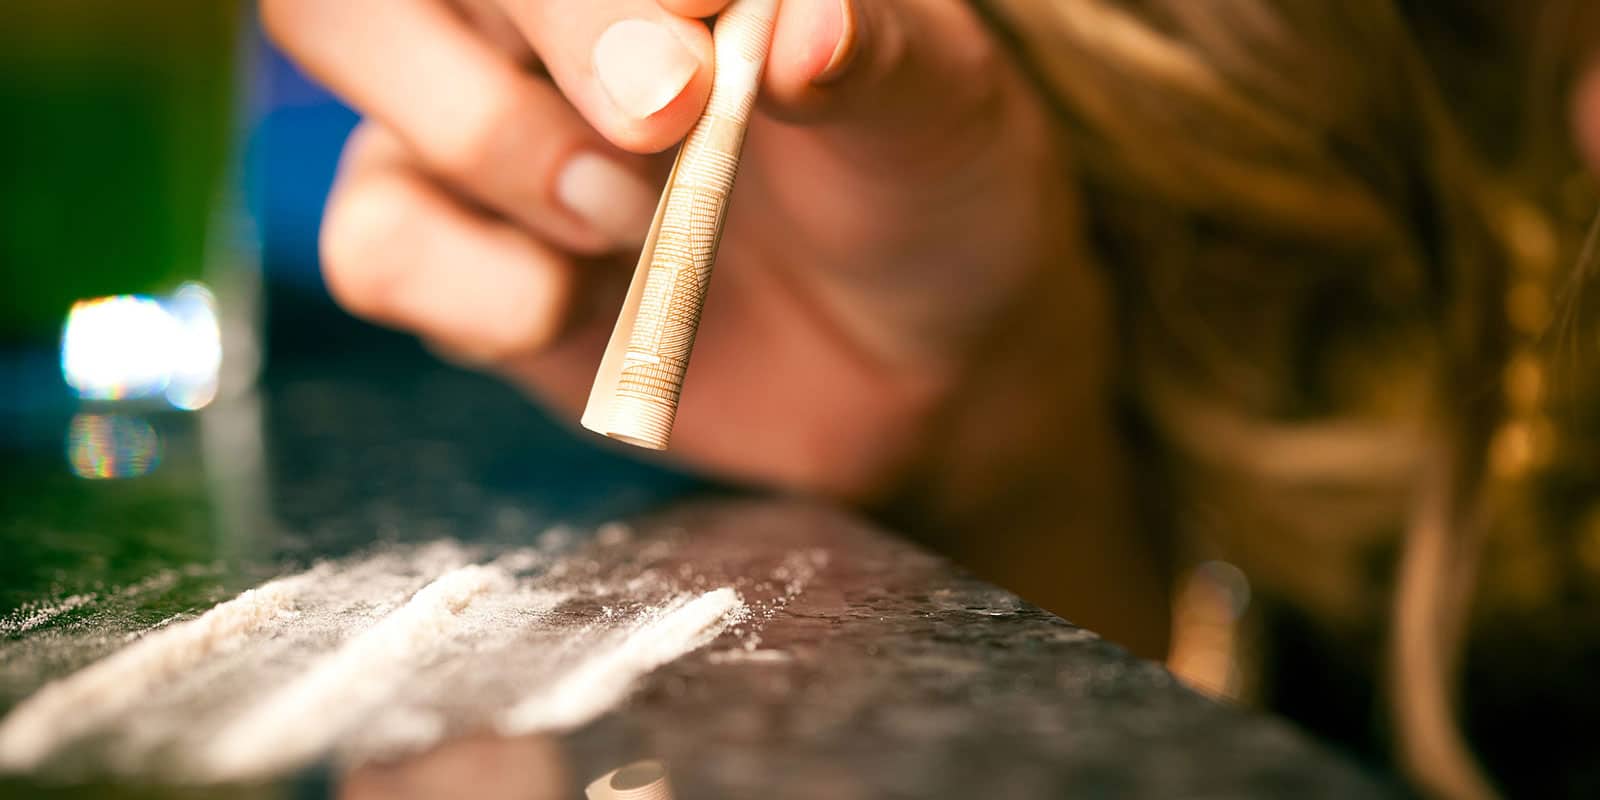 Coke Jaw, Mouth, and Nose – Dangerous Side Effects of Cocaine Use